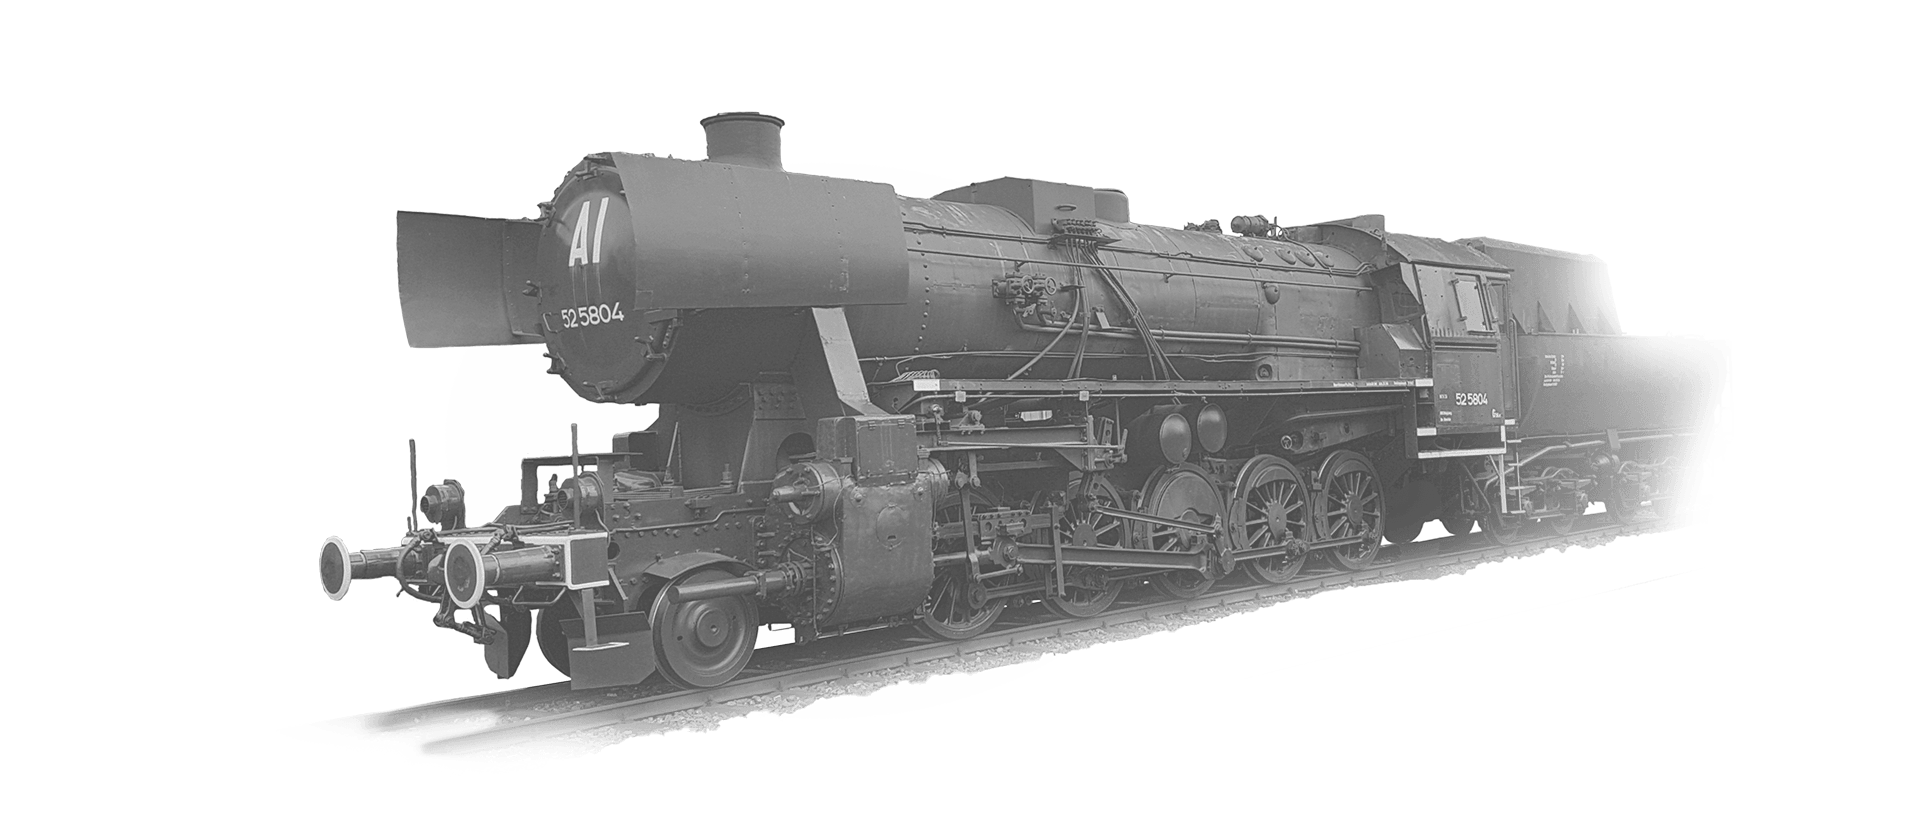 The locomotive 52-5804 in black and white